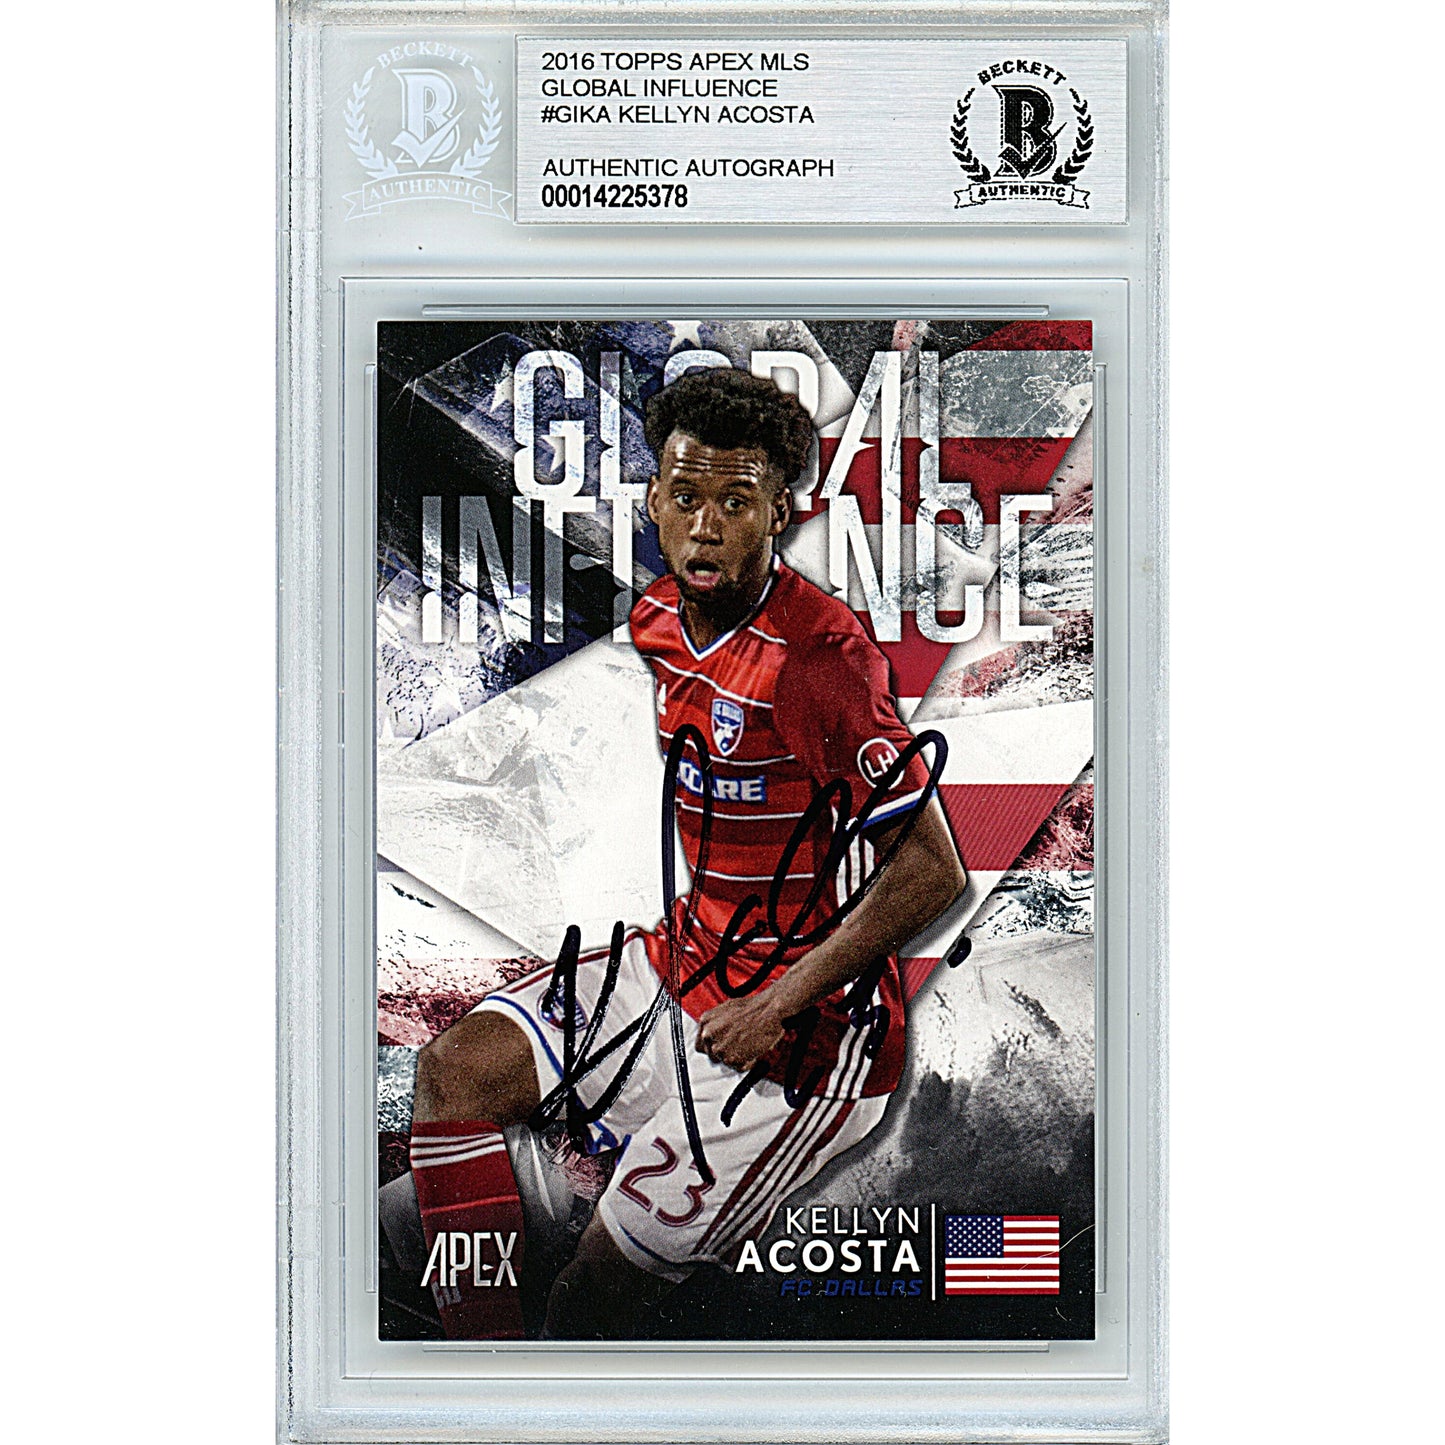 Soccer- Autographed- Kellyn Acosta Signed Team USA 2016 Topps Apex MLS Global Influence Soccer Card Beckett BAS Slabbed 00014225378 - 101